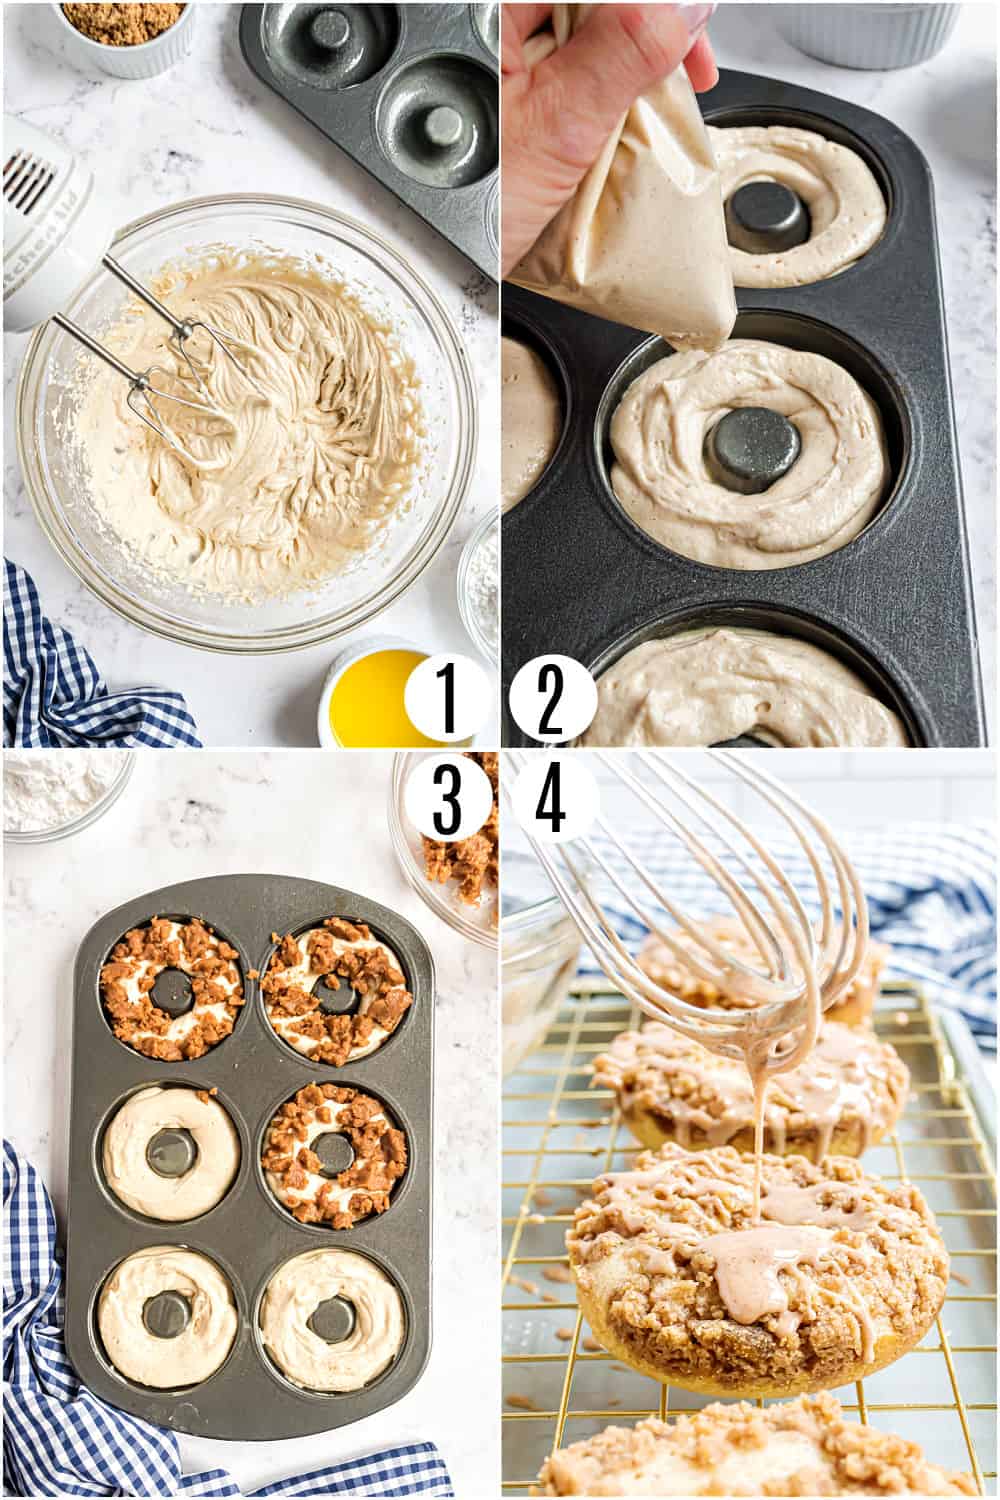 Step by step photos showing how to make coffee cake donuts.